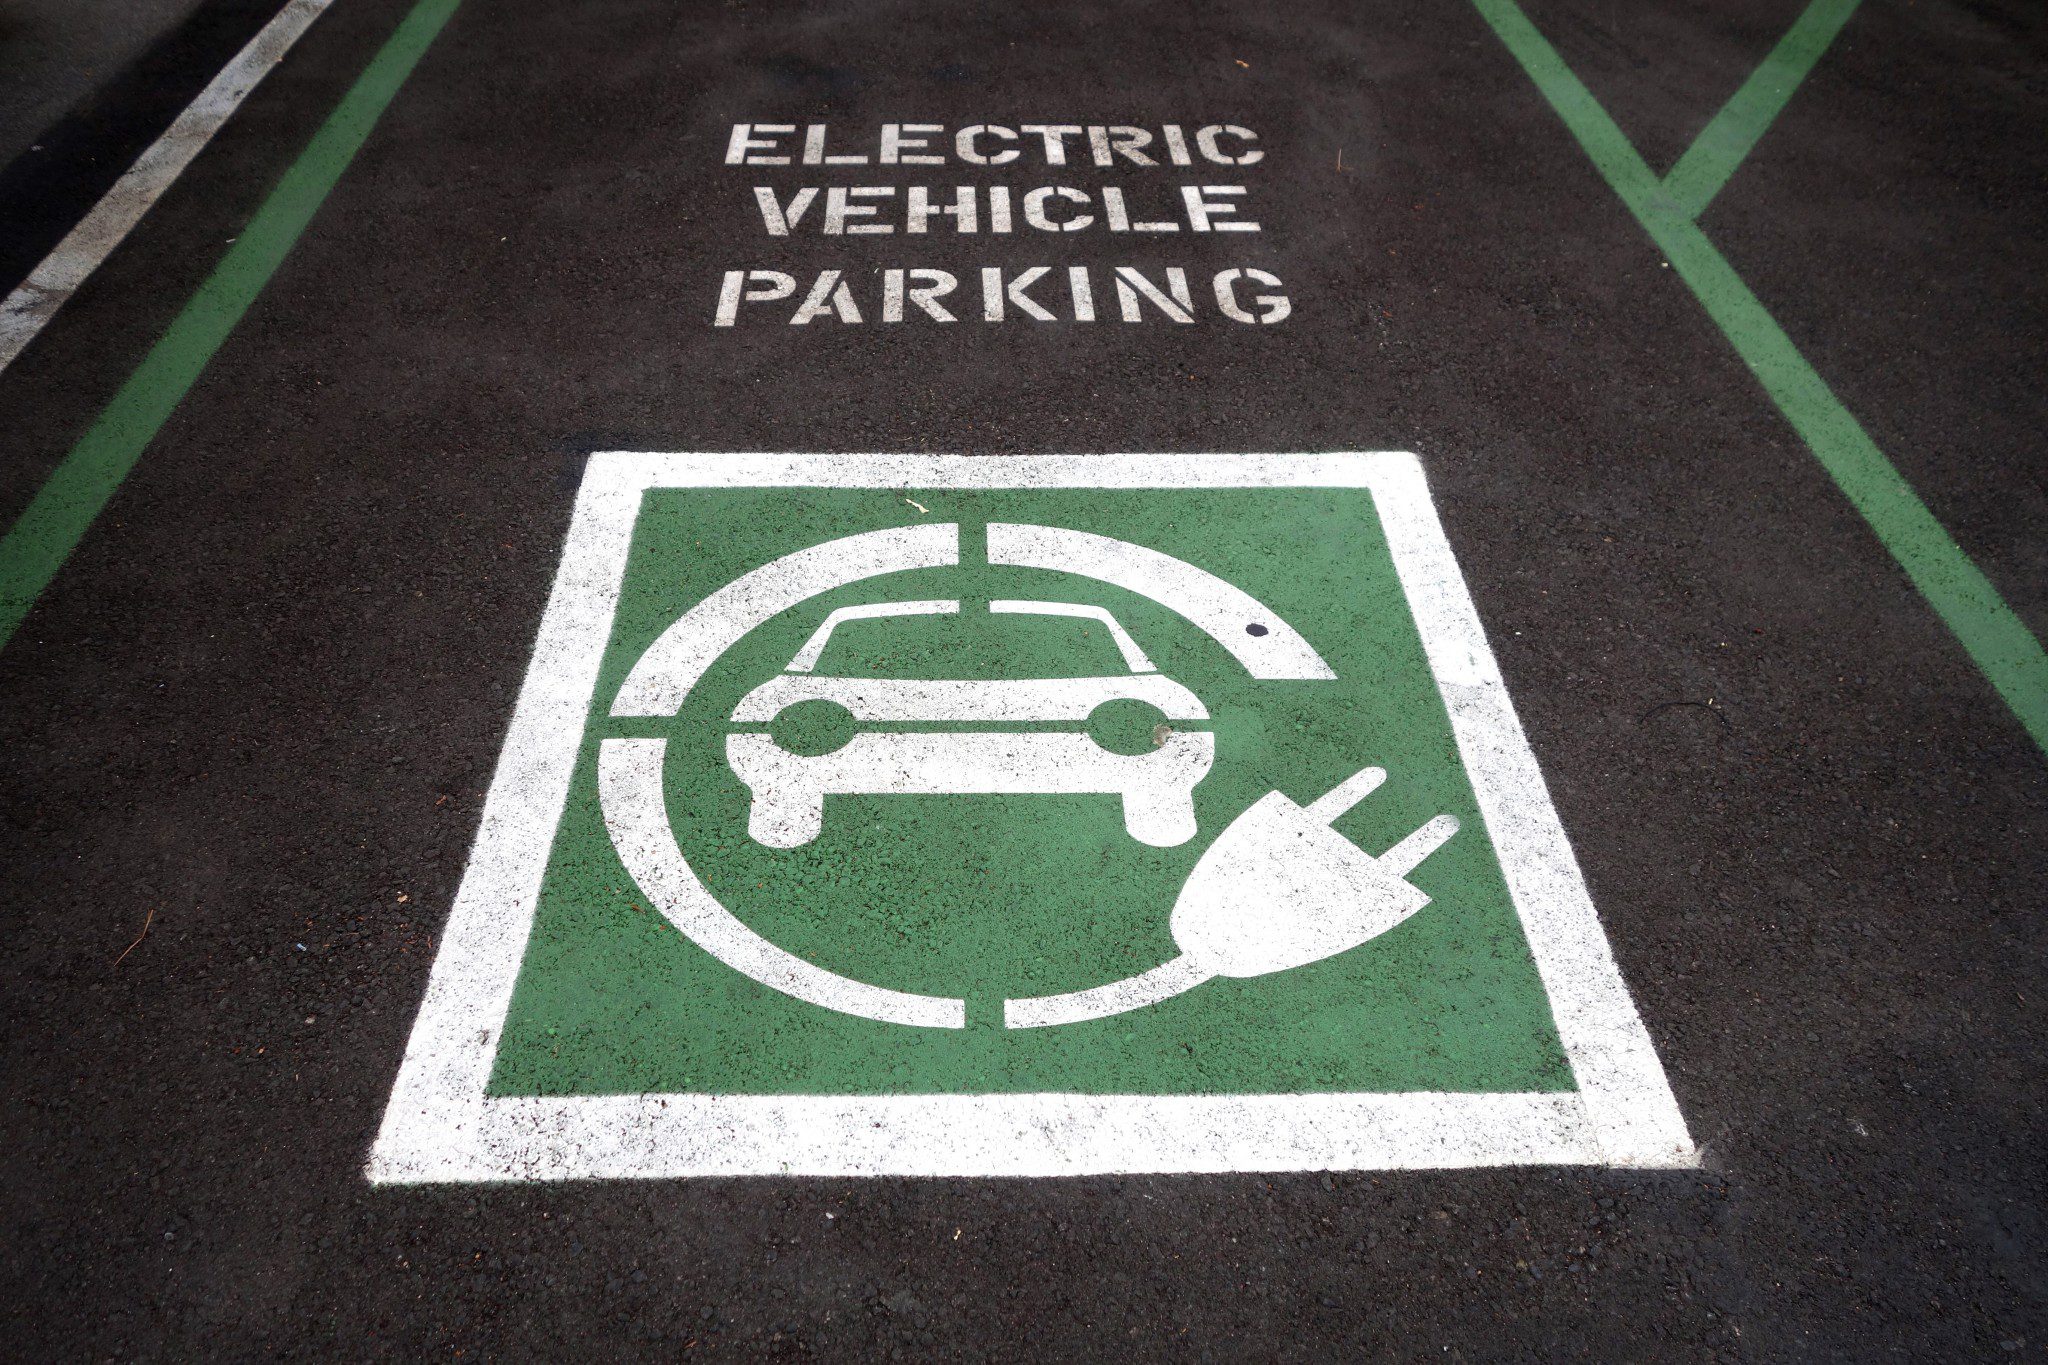 Rogers Services To Install Electric Vehicle Charging Stations At Mitsubishi Dealerships